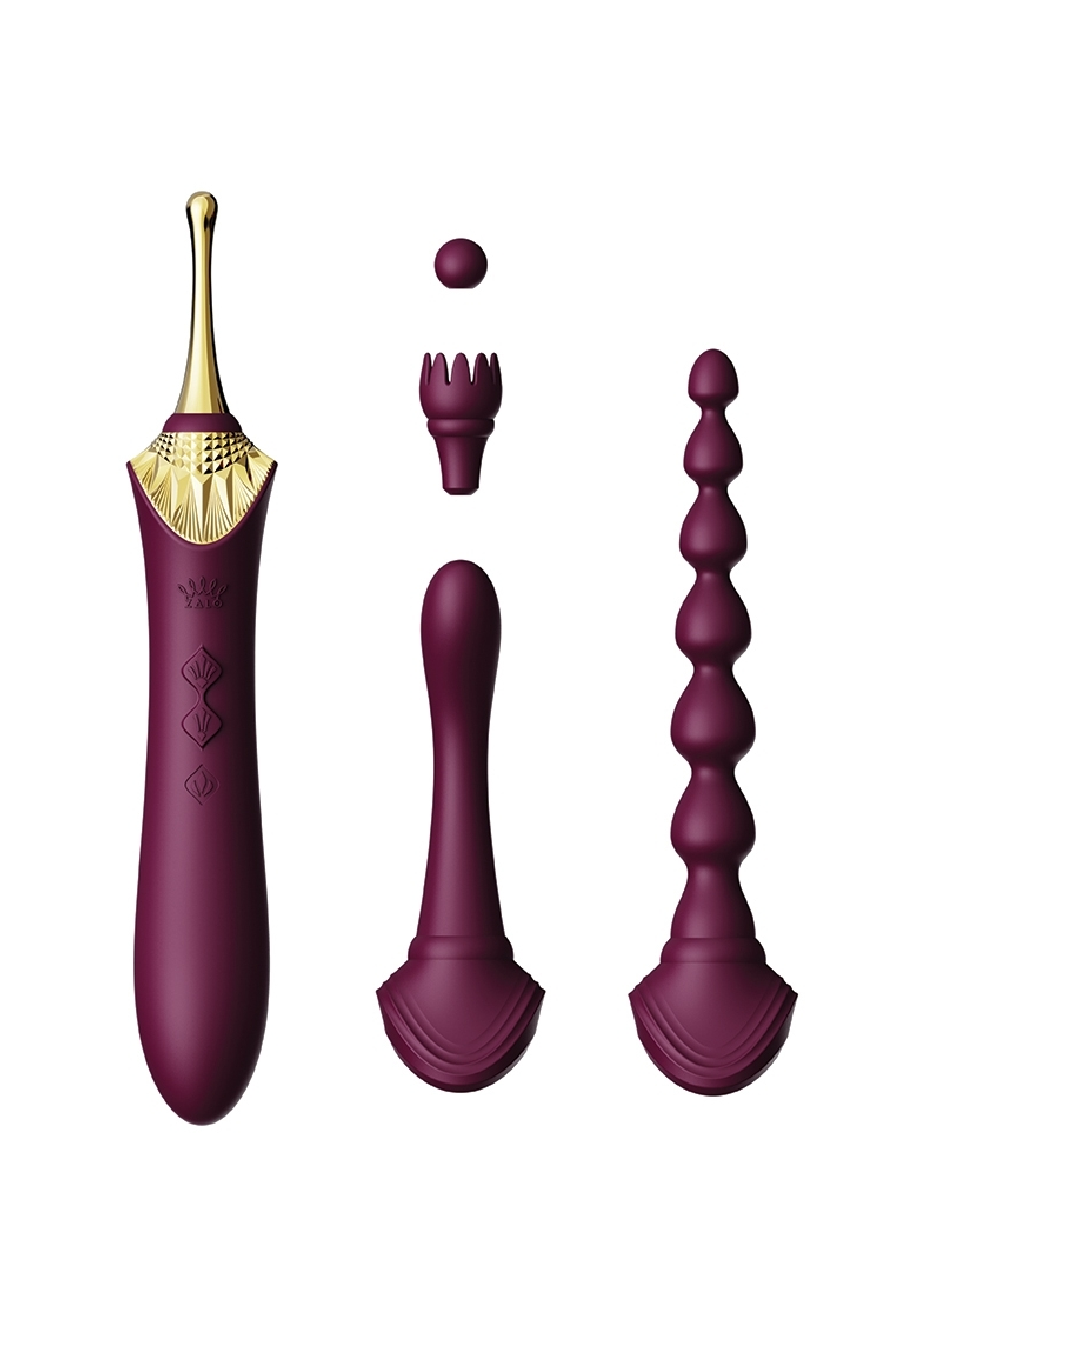 Zalo Bess 2.0 Clitoral Heating Vibrator with Attachments  - Purple with interchangeable attachments 